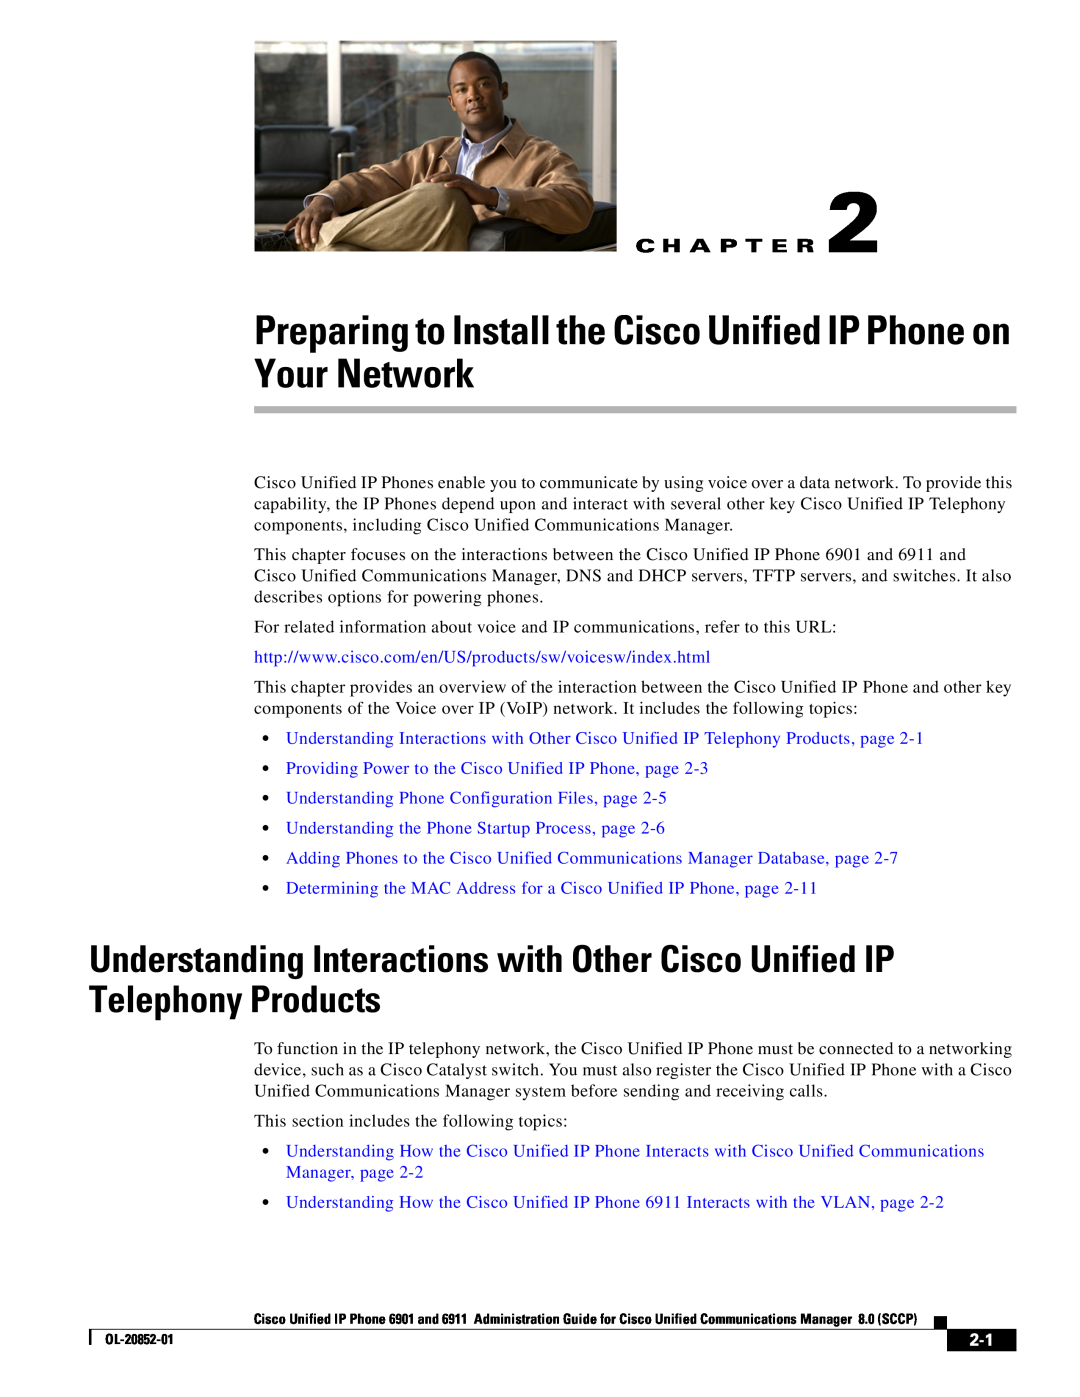 Cisco Systems 691 manual Providing Power to the Cisco Unified IP Phone, page, C H A P T E R 